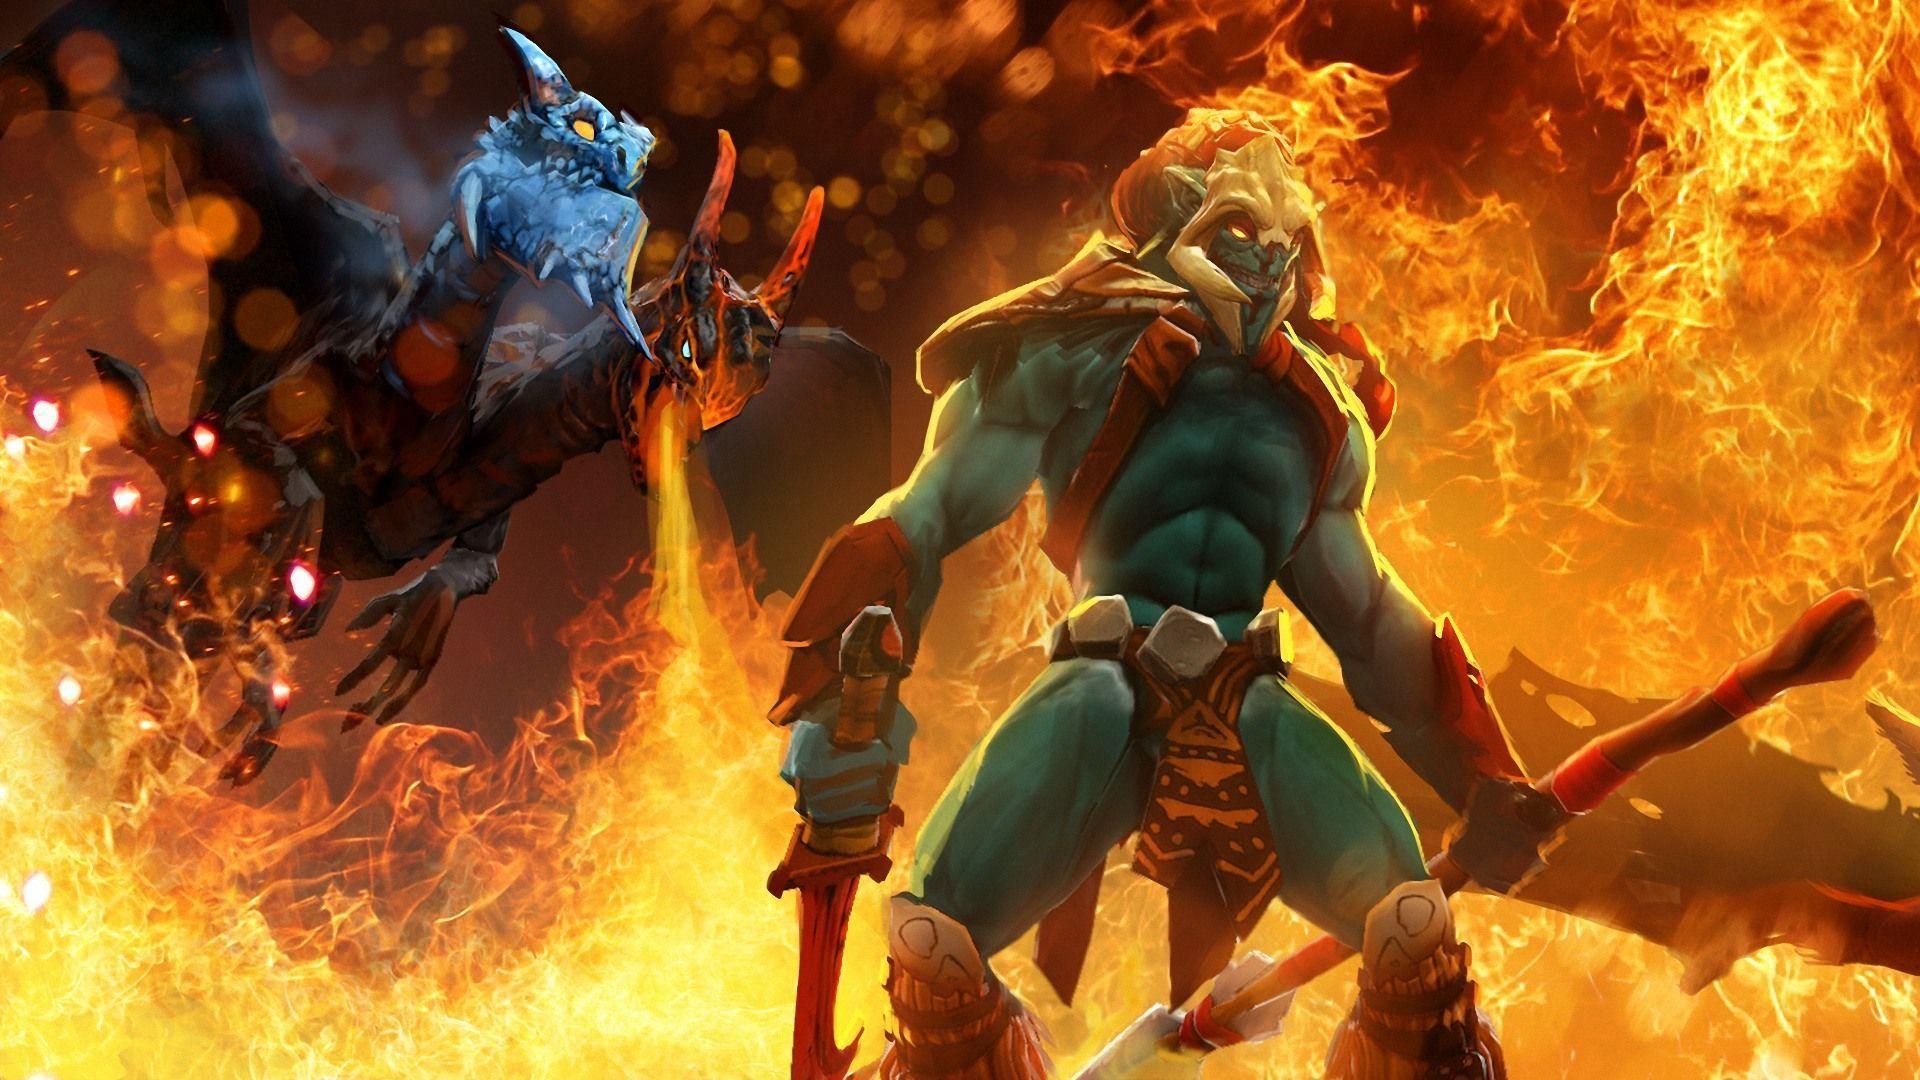 Dota 2 Wallpapers 93 images inside